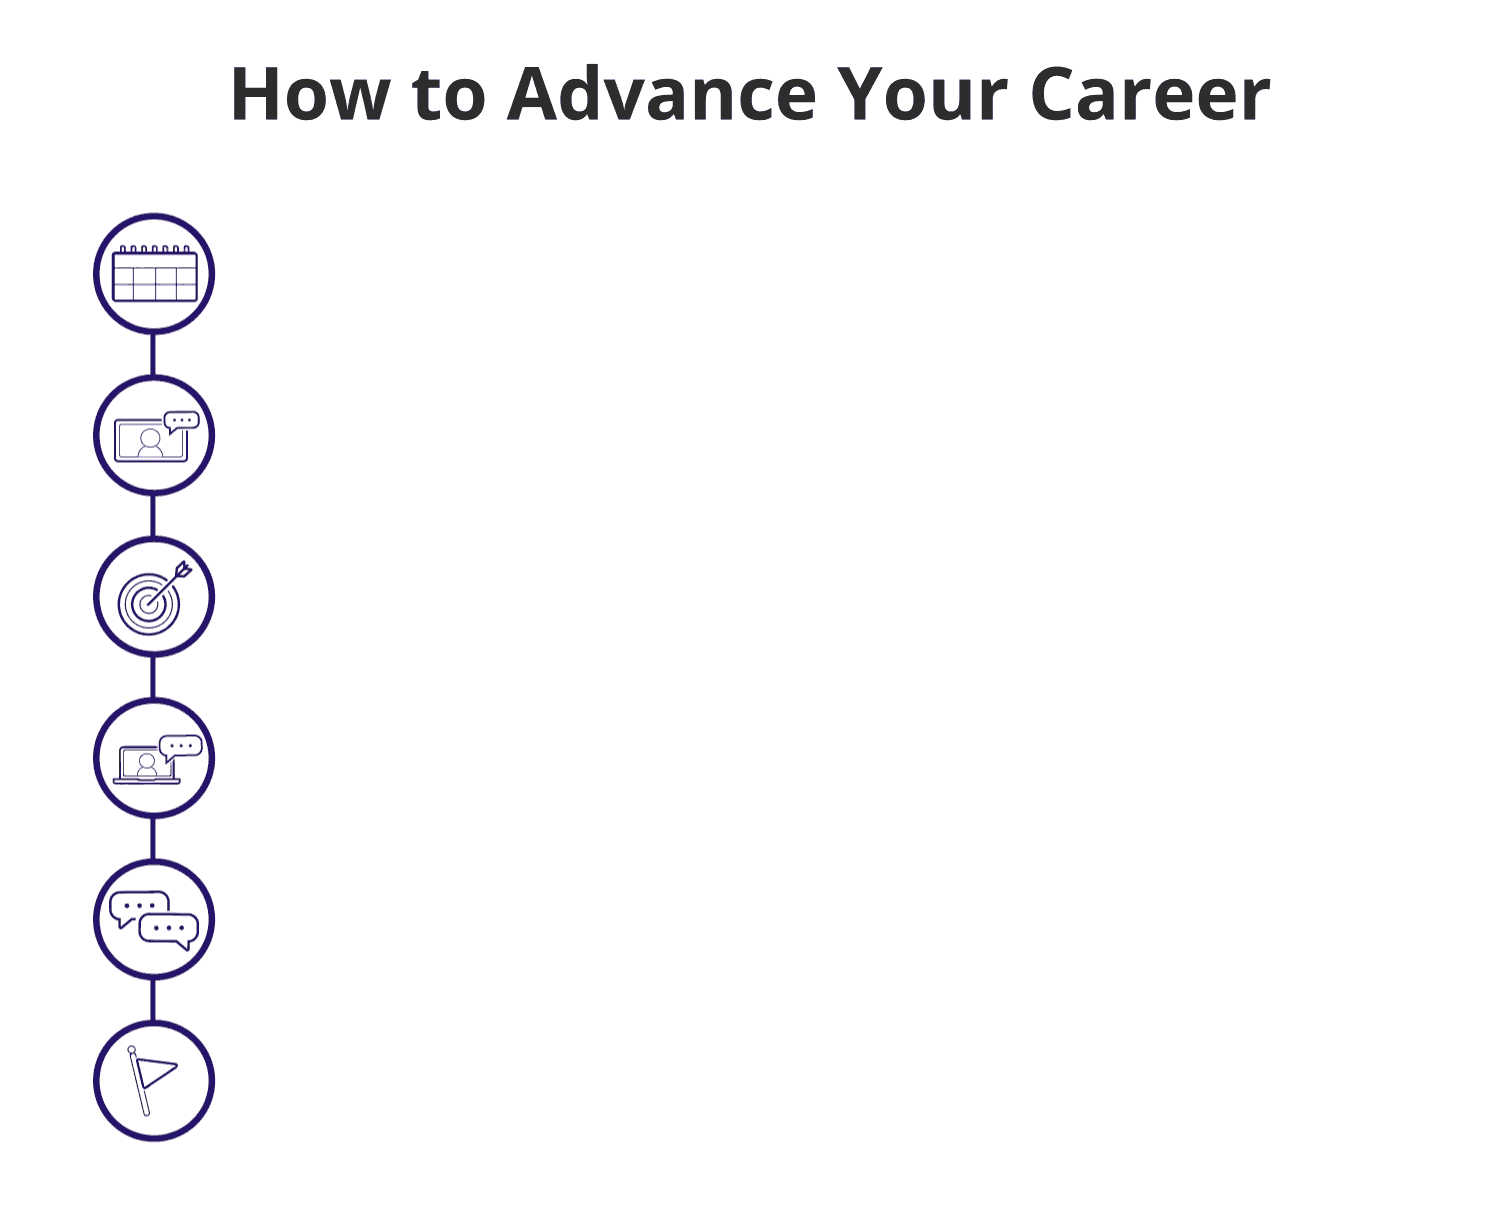 animated GIF depicting how to advance your career: Book an appointment with a Kaplan Success Coach. Meet with your Coach on your requested date/time. Talk to your Coach about your career goals. Get customized career services support with job searching, resume writing, and developing interview skills. Search and interview for the job you want. Start the next exciting phase of your career.